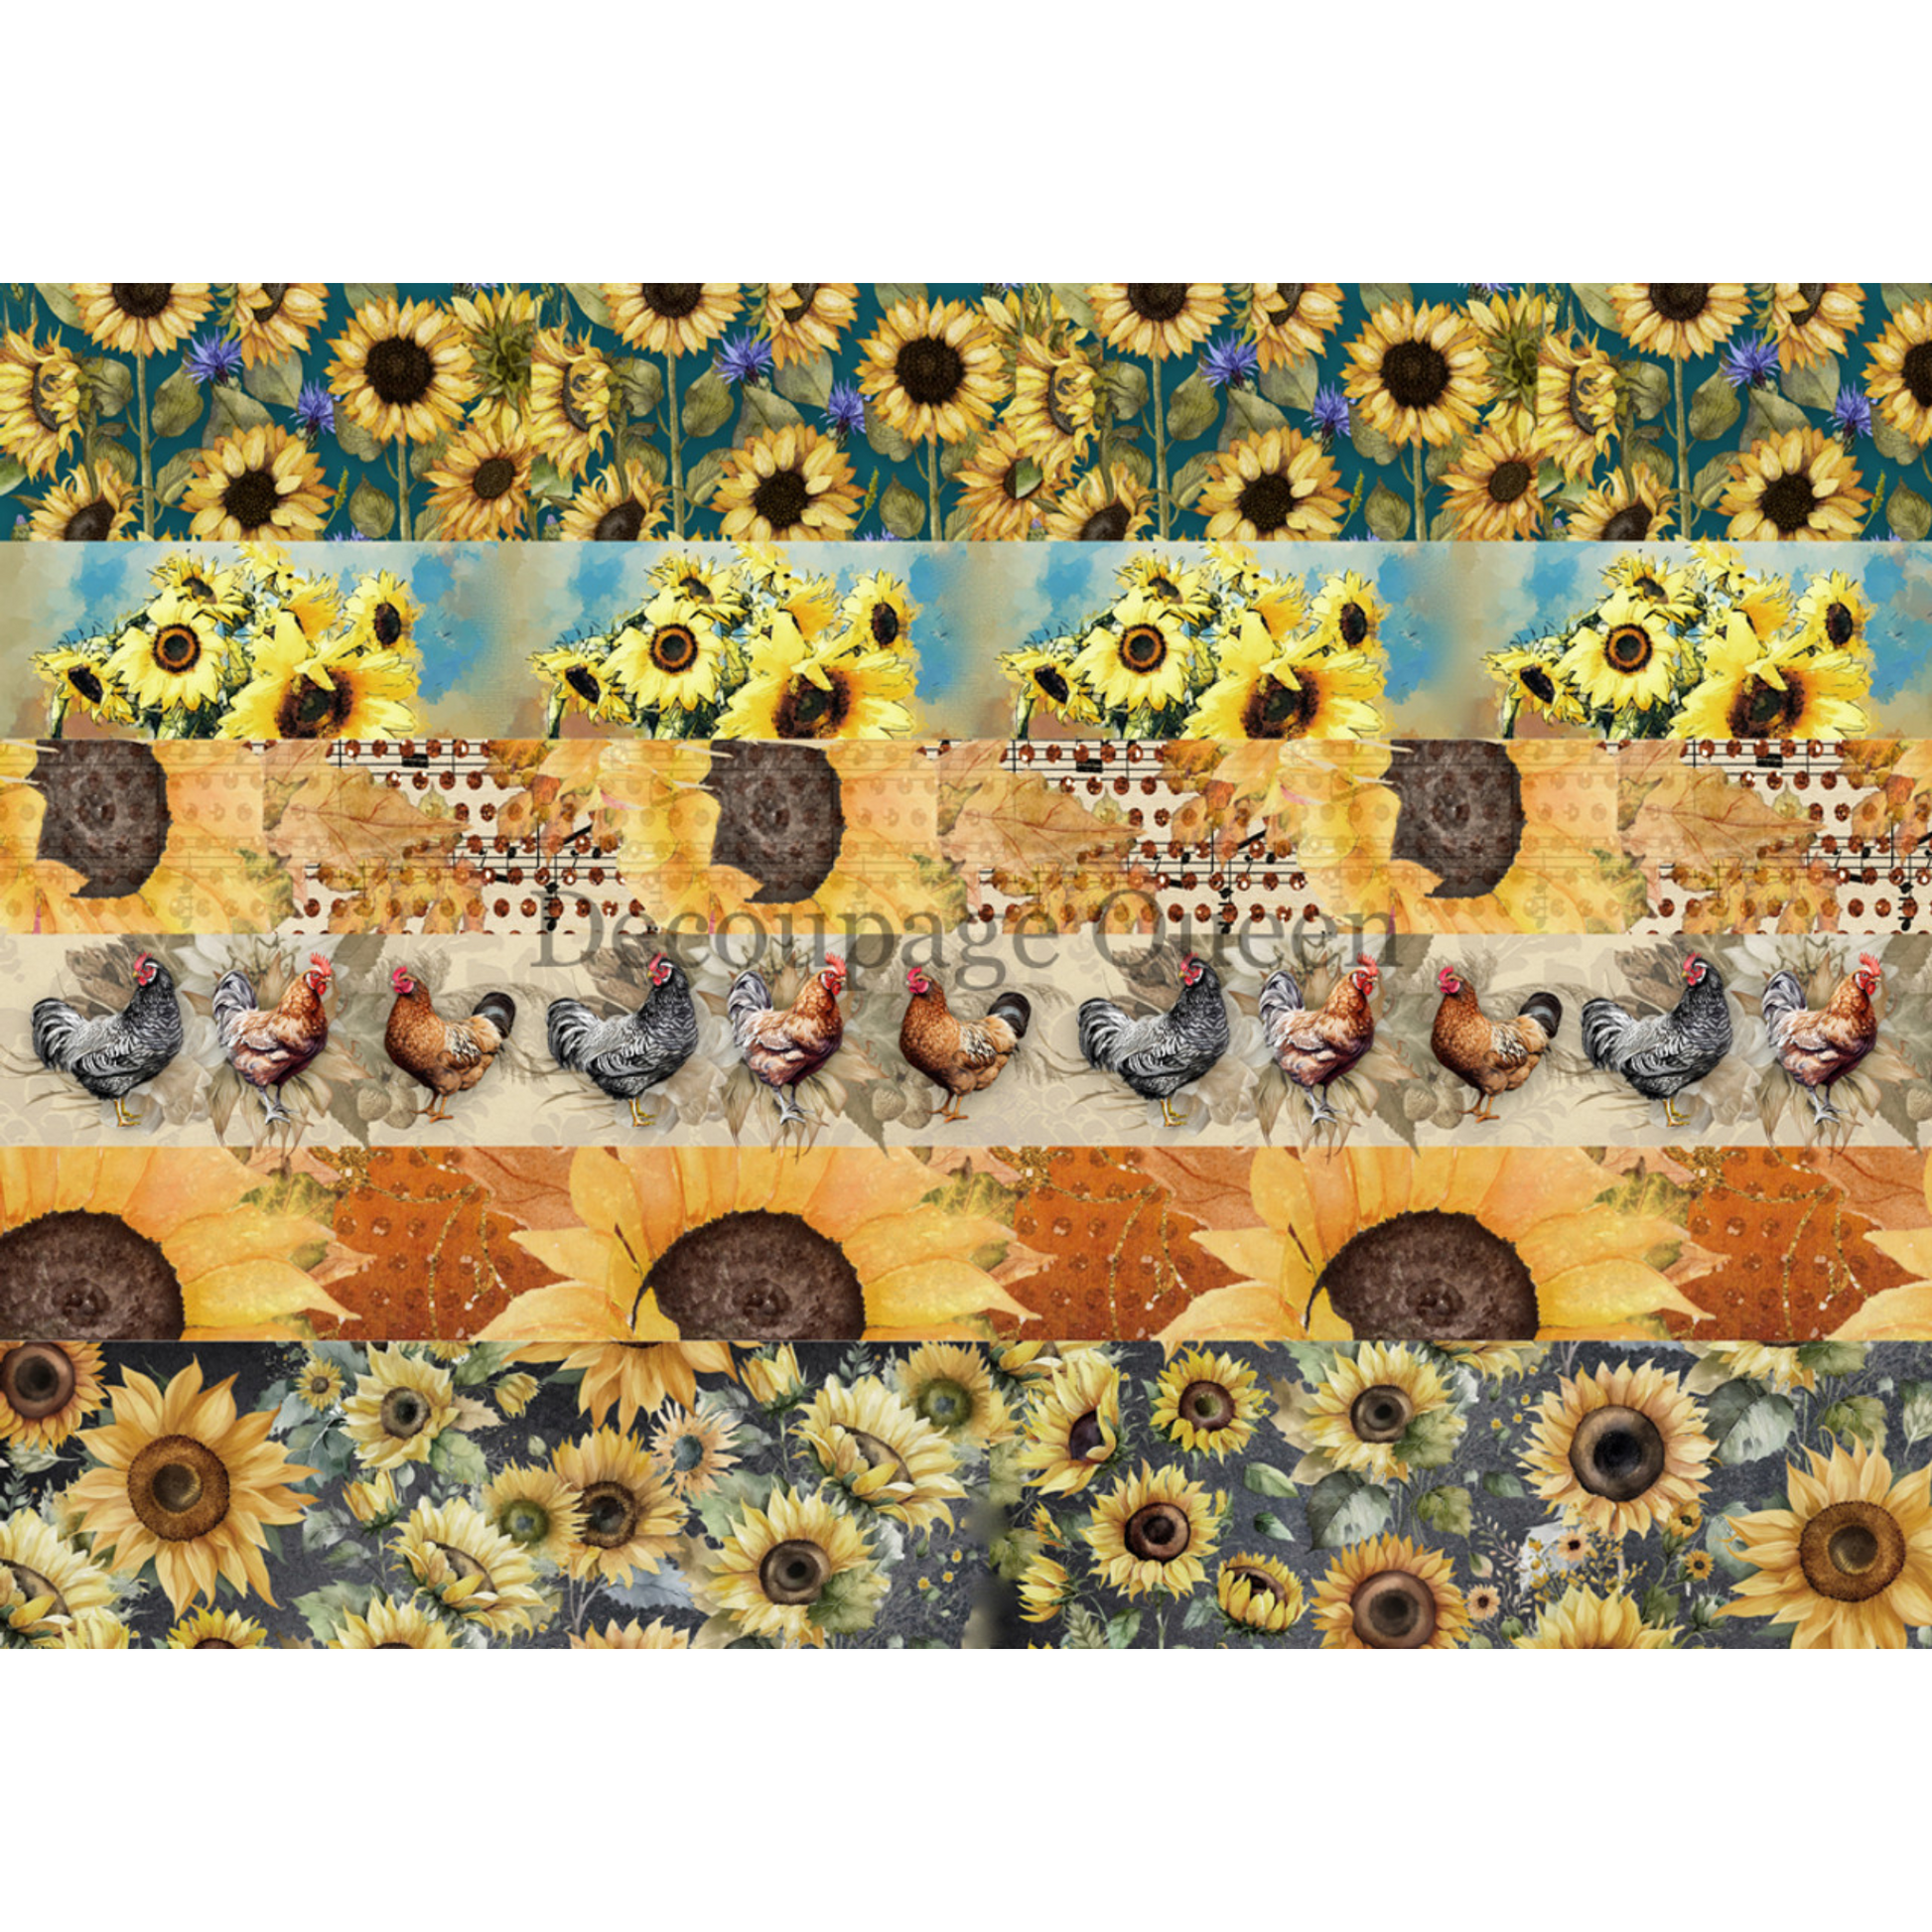 "Sunflower Ephemera Journal Kit" by Decoupage Queen.  Page 5.  Available at Milton's Daughter.